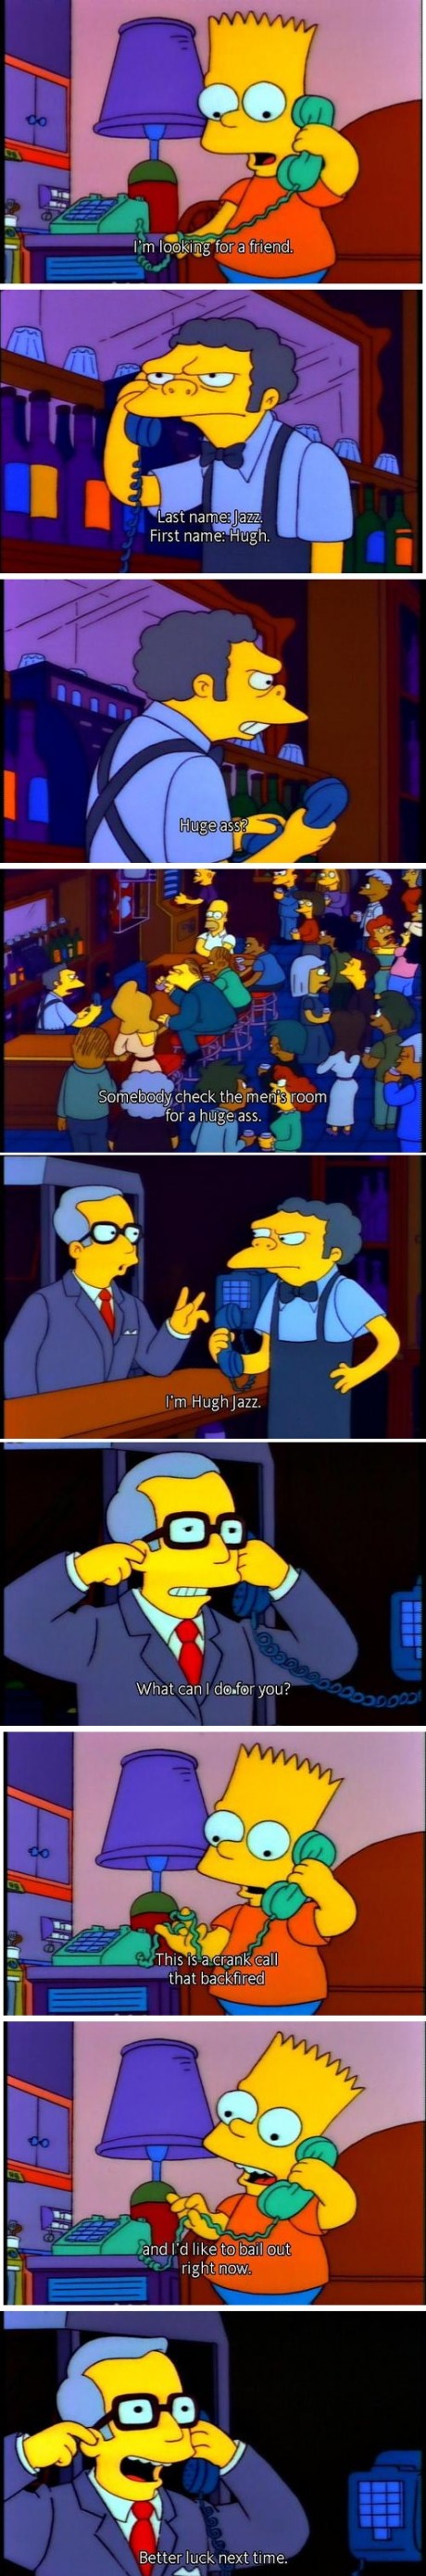 Oh the Simpsons.